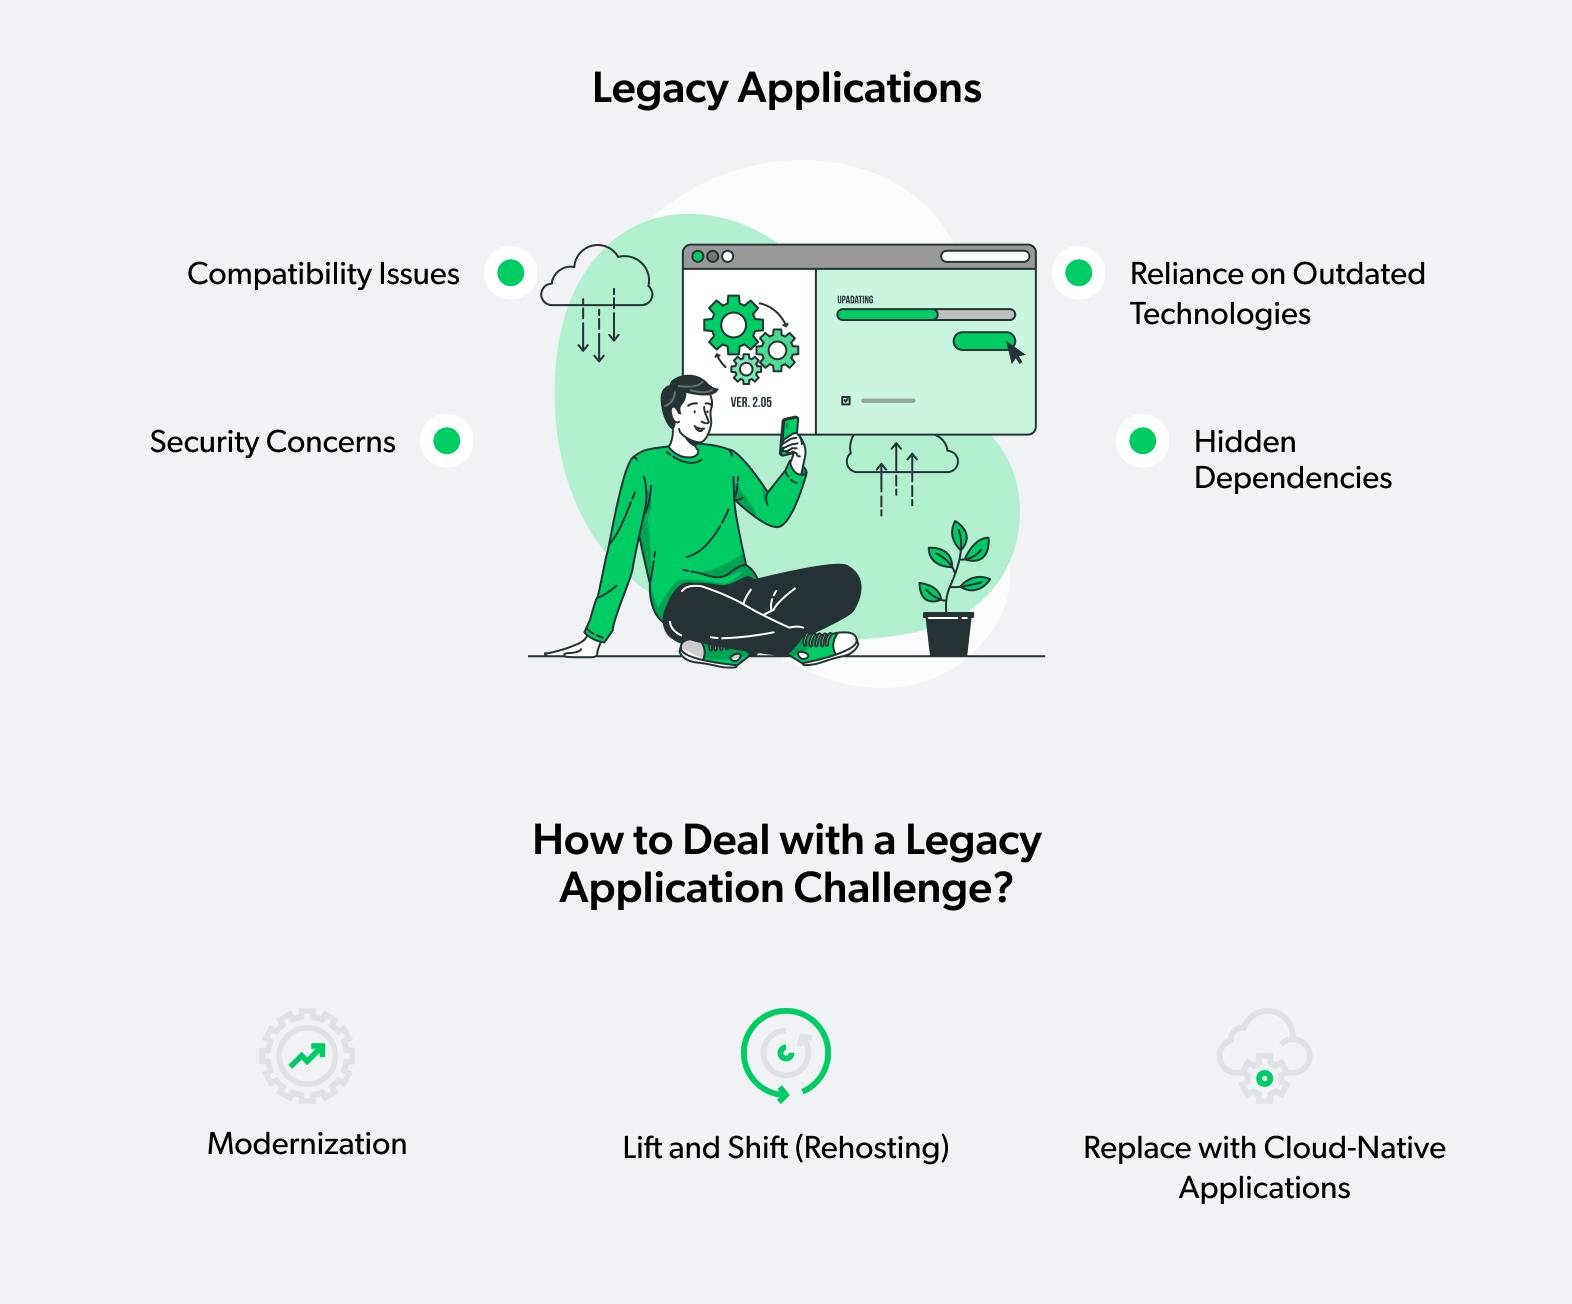 Legacy Applications in cloud migration